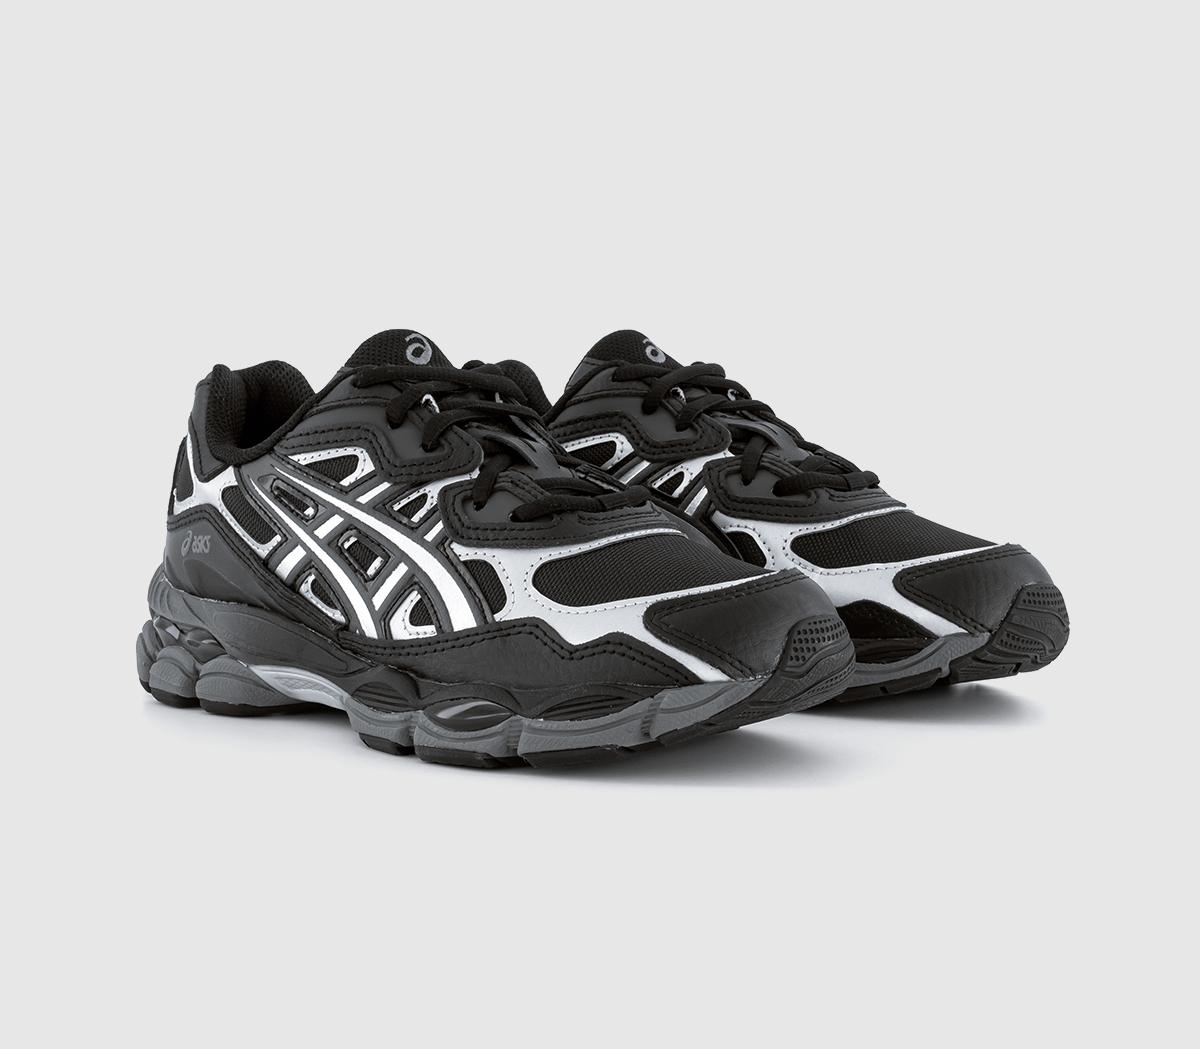 Asics Gel Nyc Trainers Black Pink Lace, 6.5